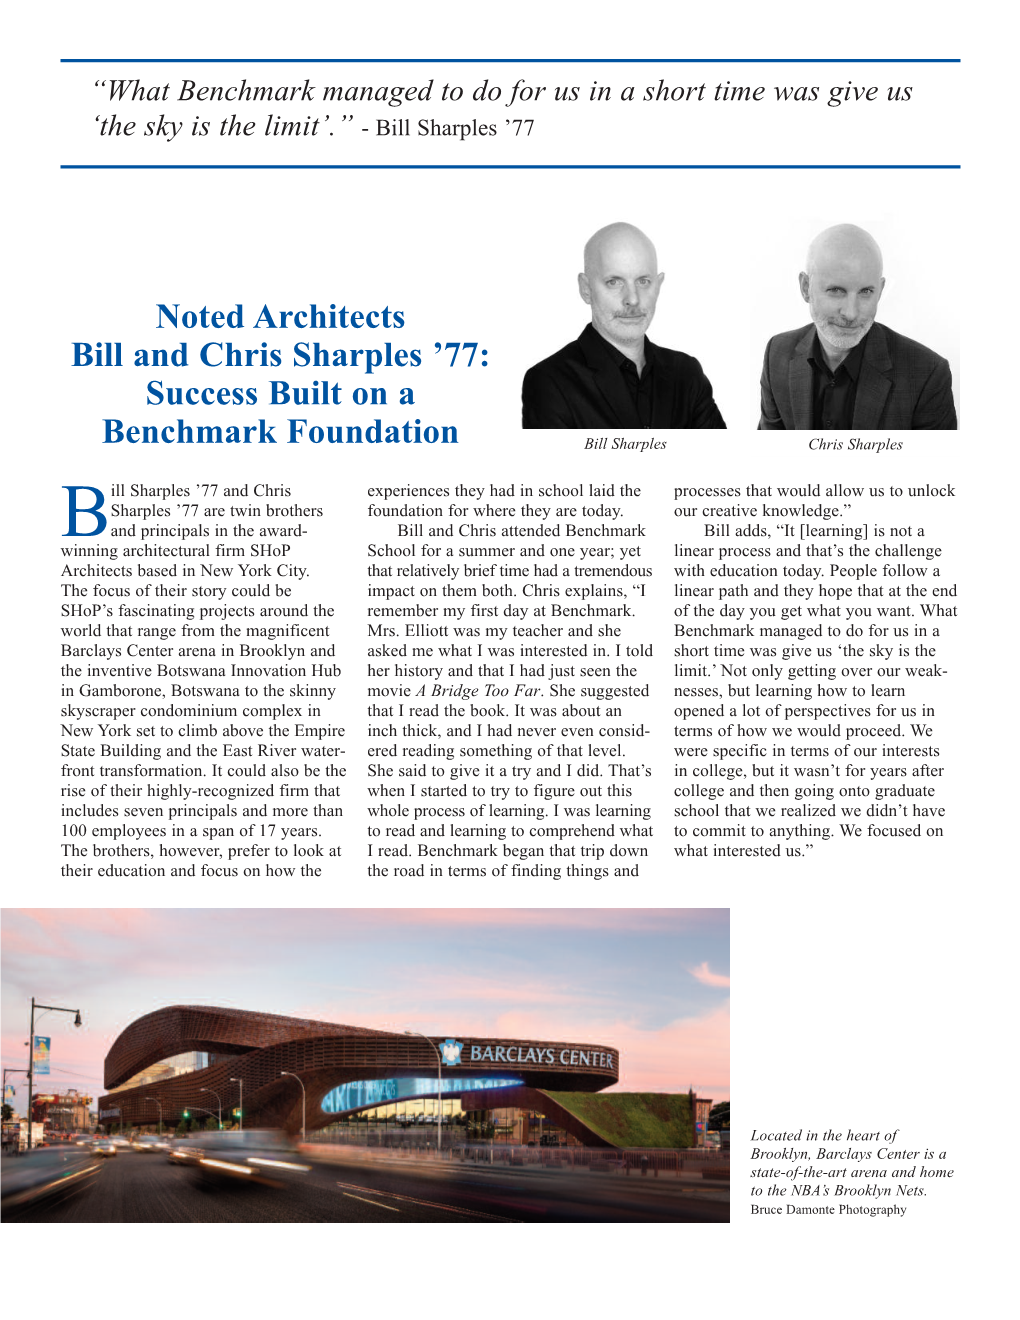 Noted Architects Bill and Chris Sharples ’77: Success Built on A